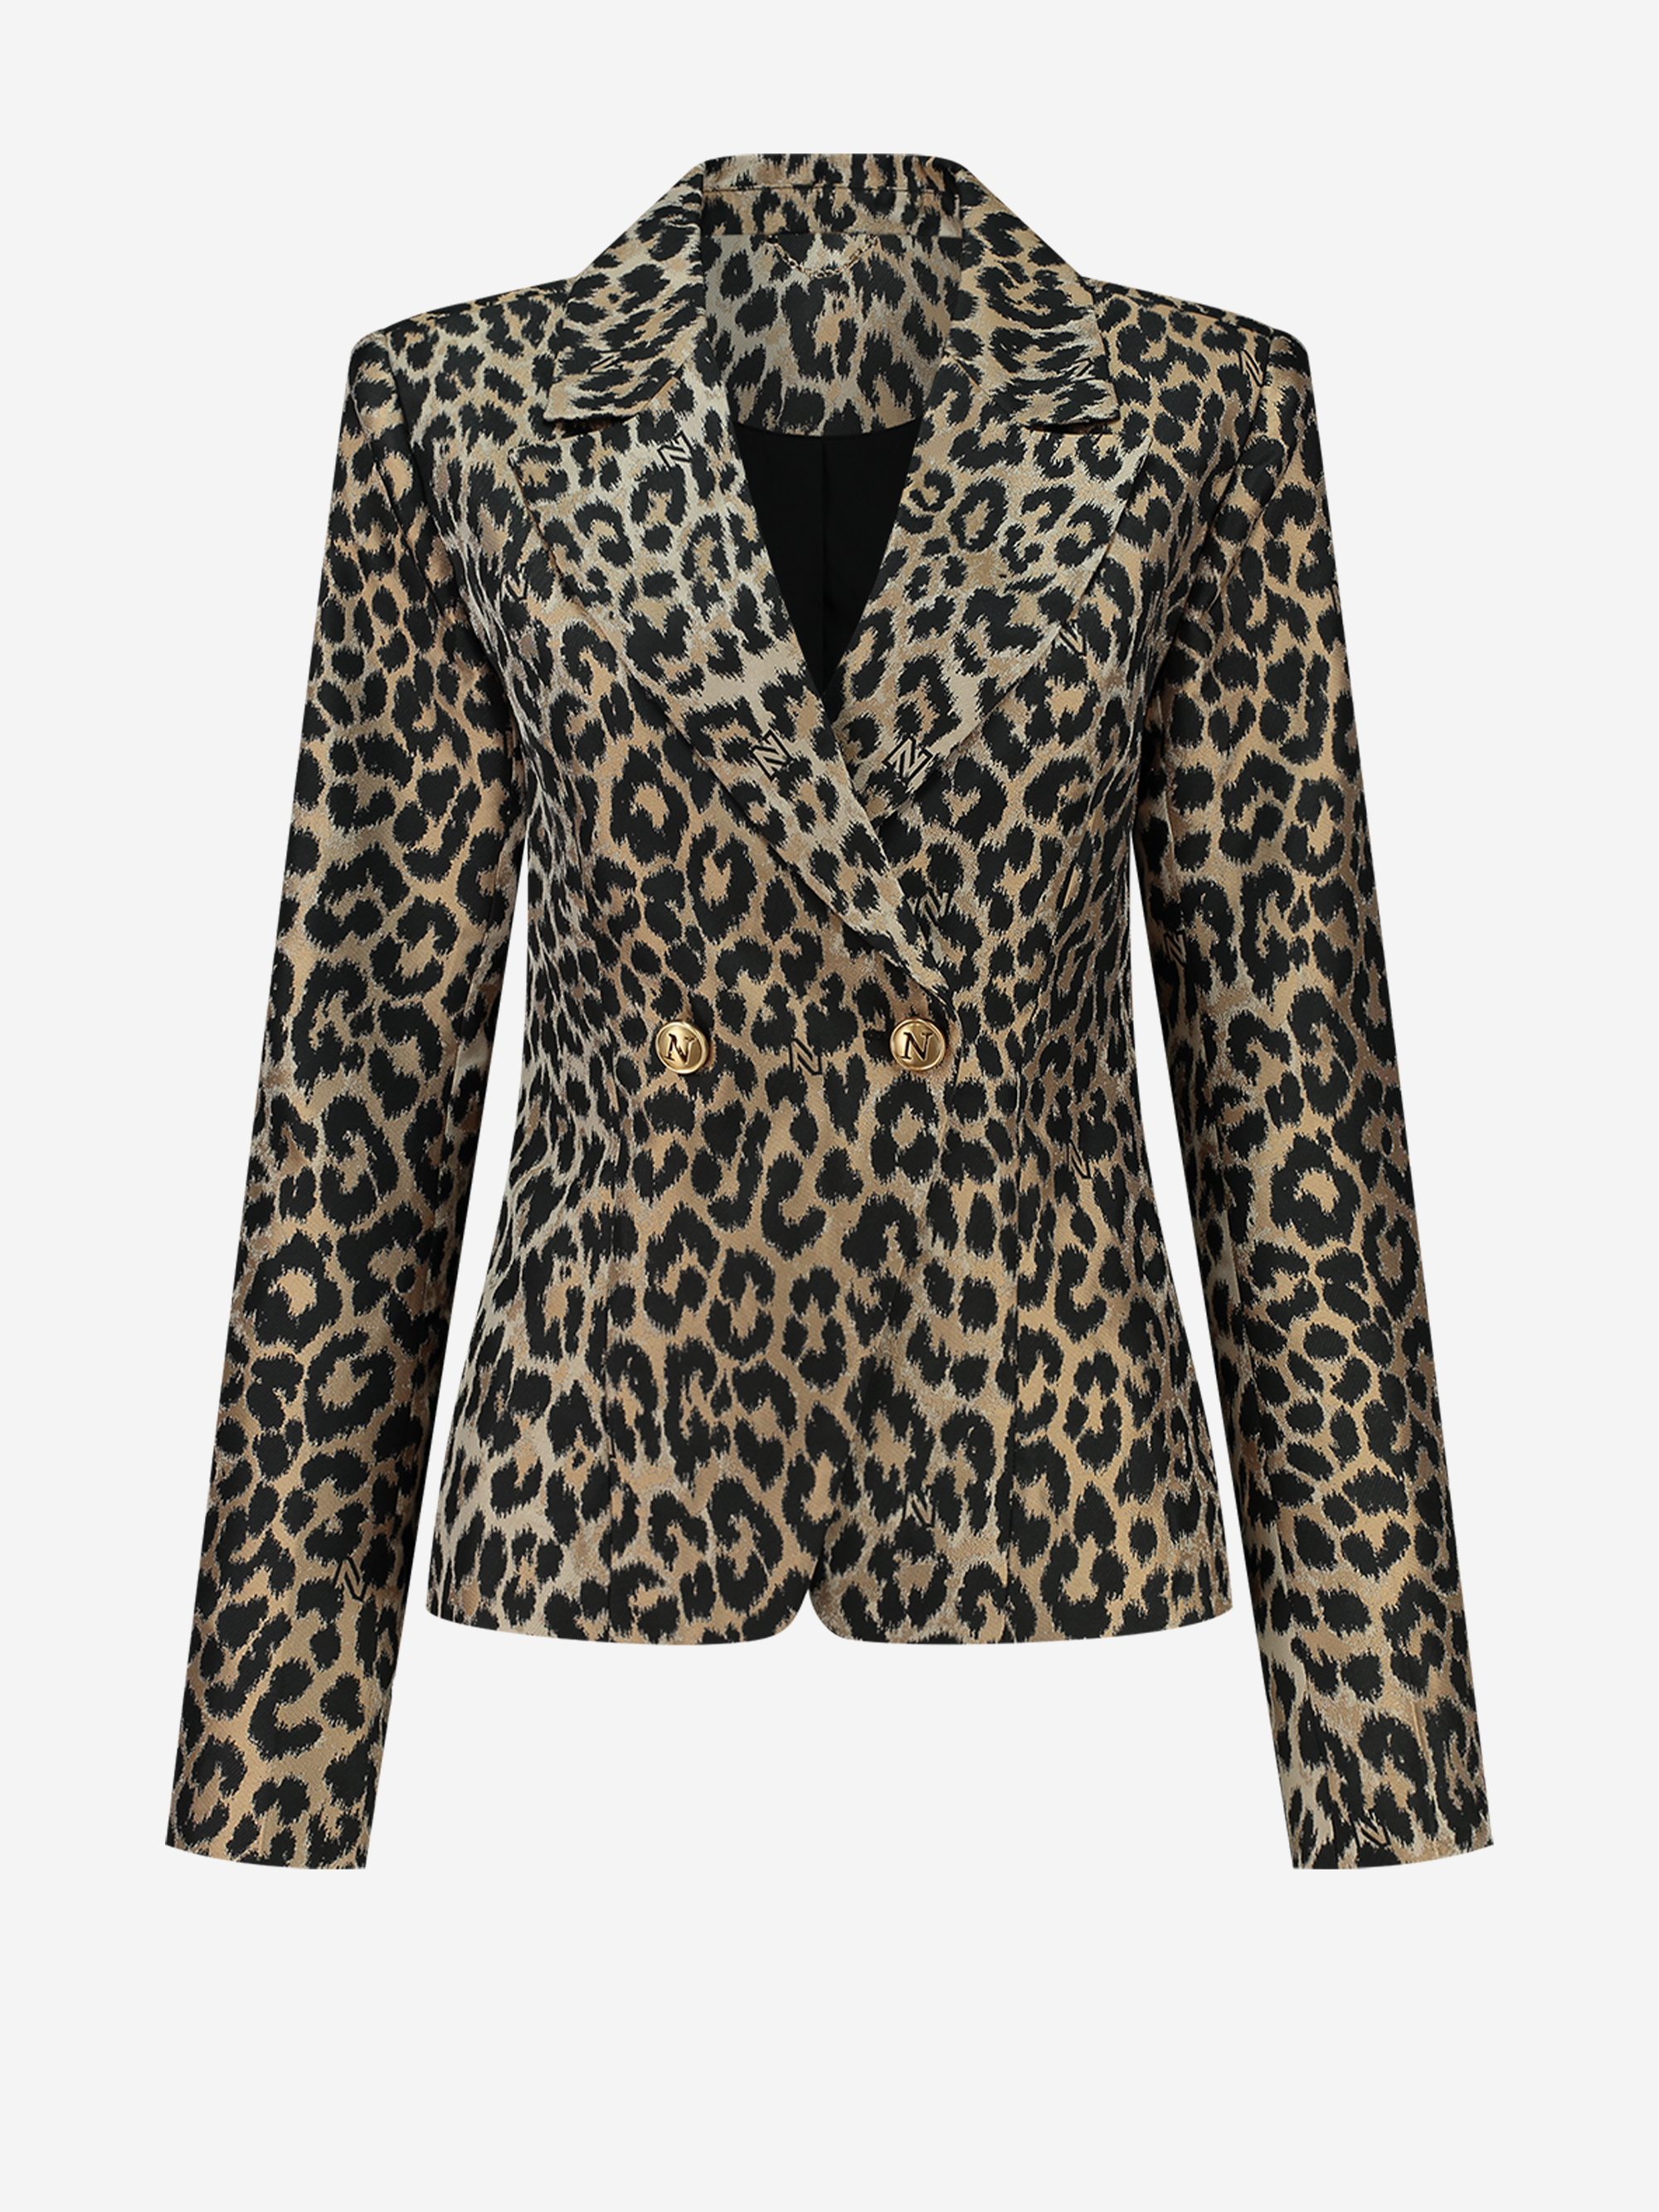 Fitted blazer with animal print